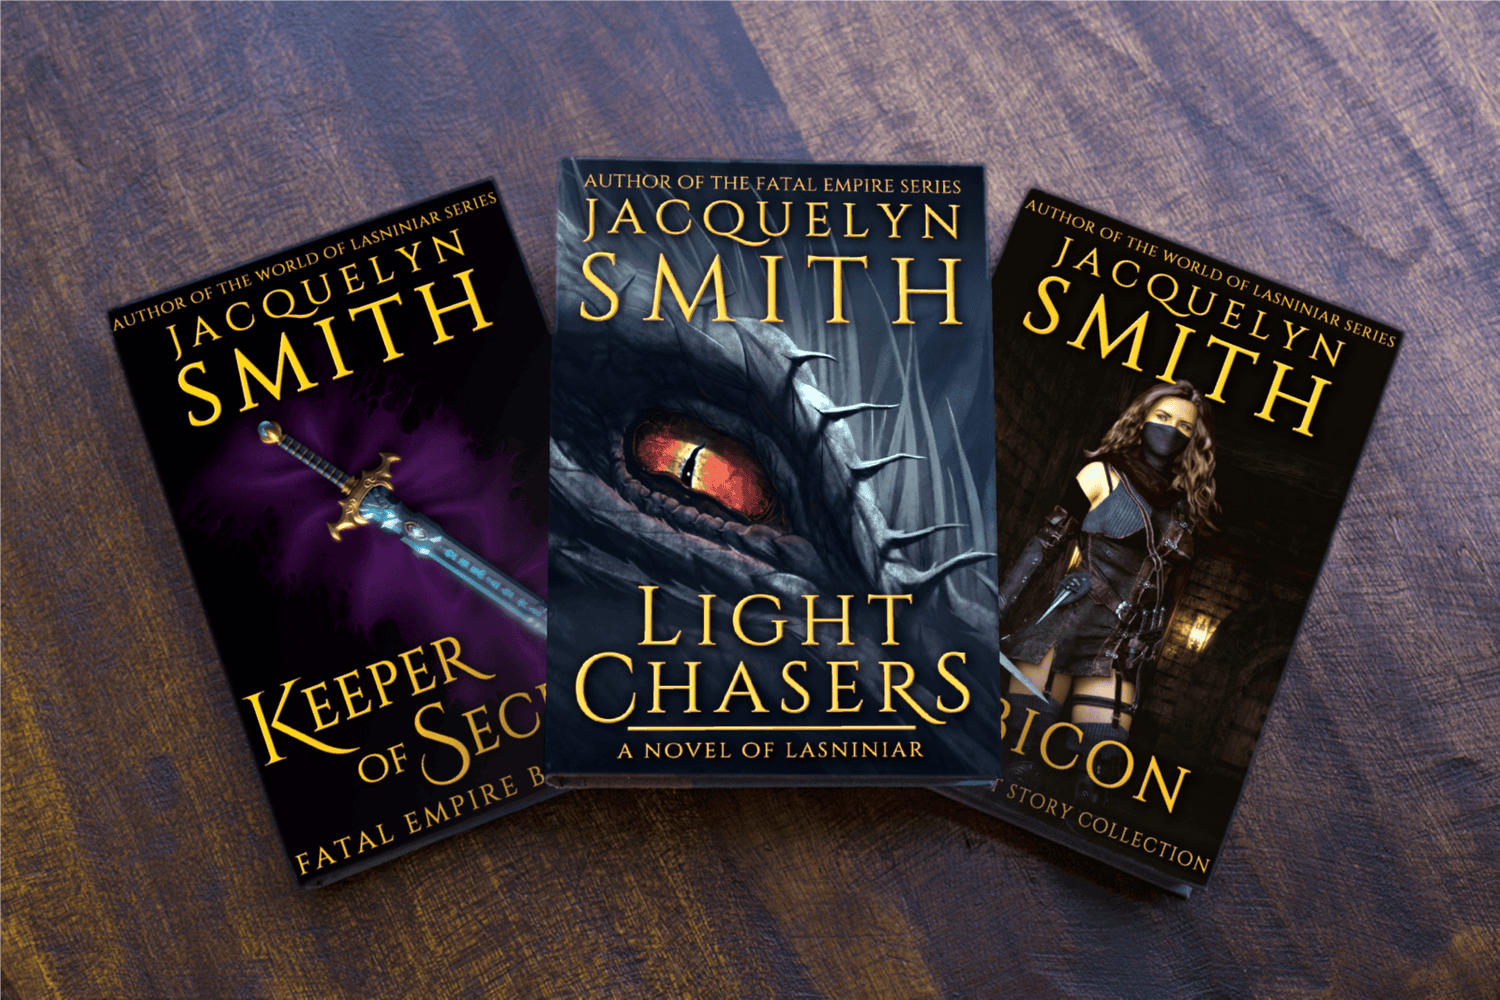 Light Chasers, Keeper of Secrets, Rubicon fantasy paperbacks on a wooden table